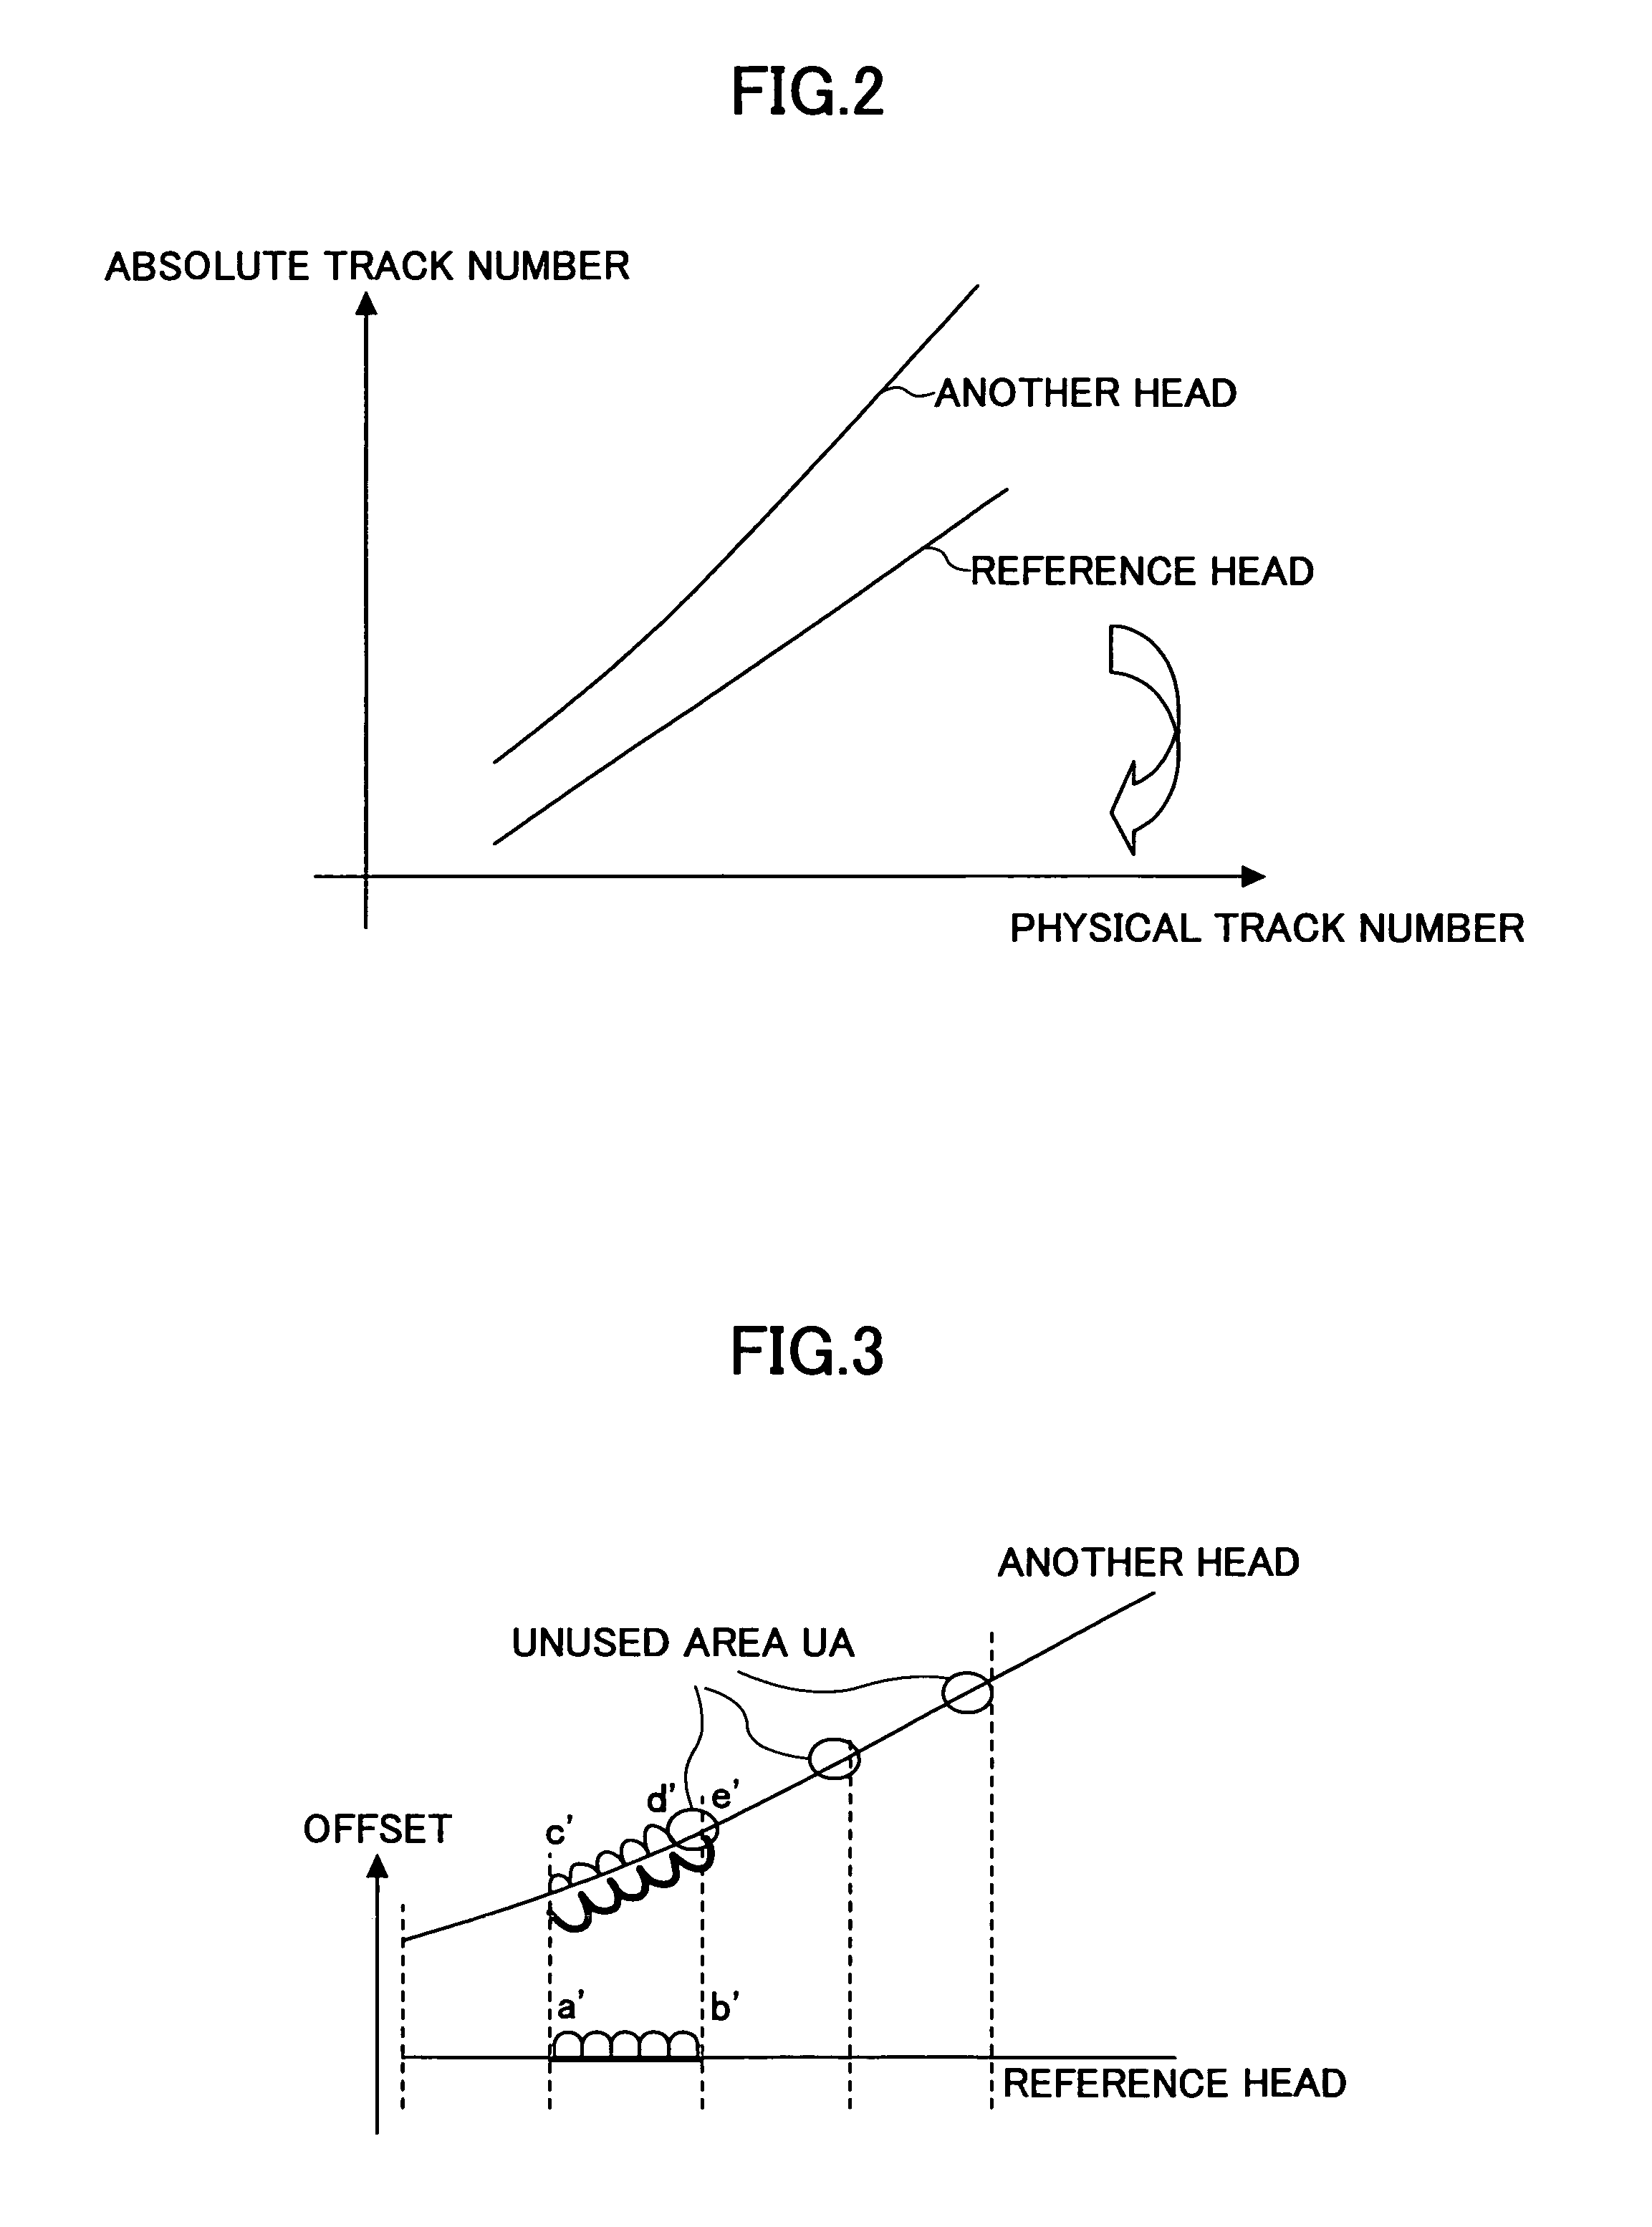 Magnetic disk apparatus suppressing adjacent track influence